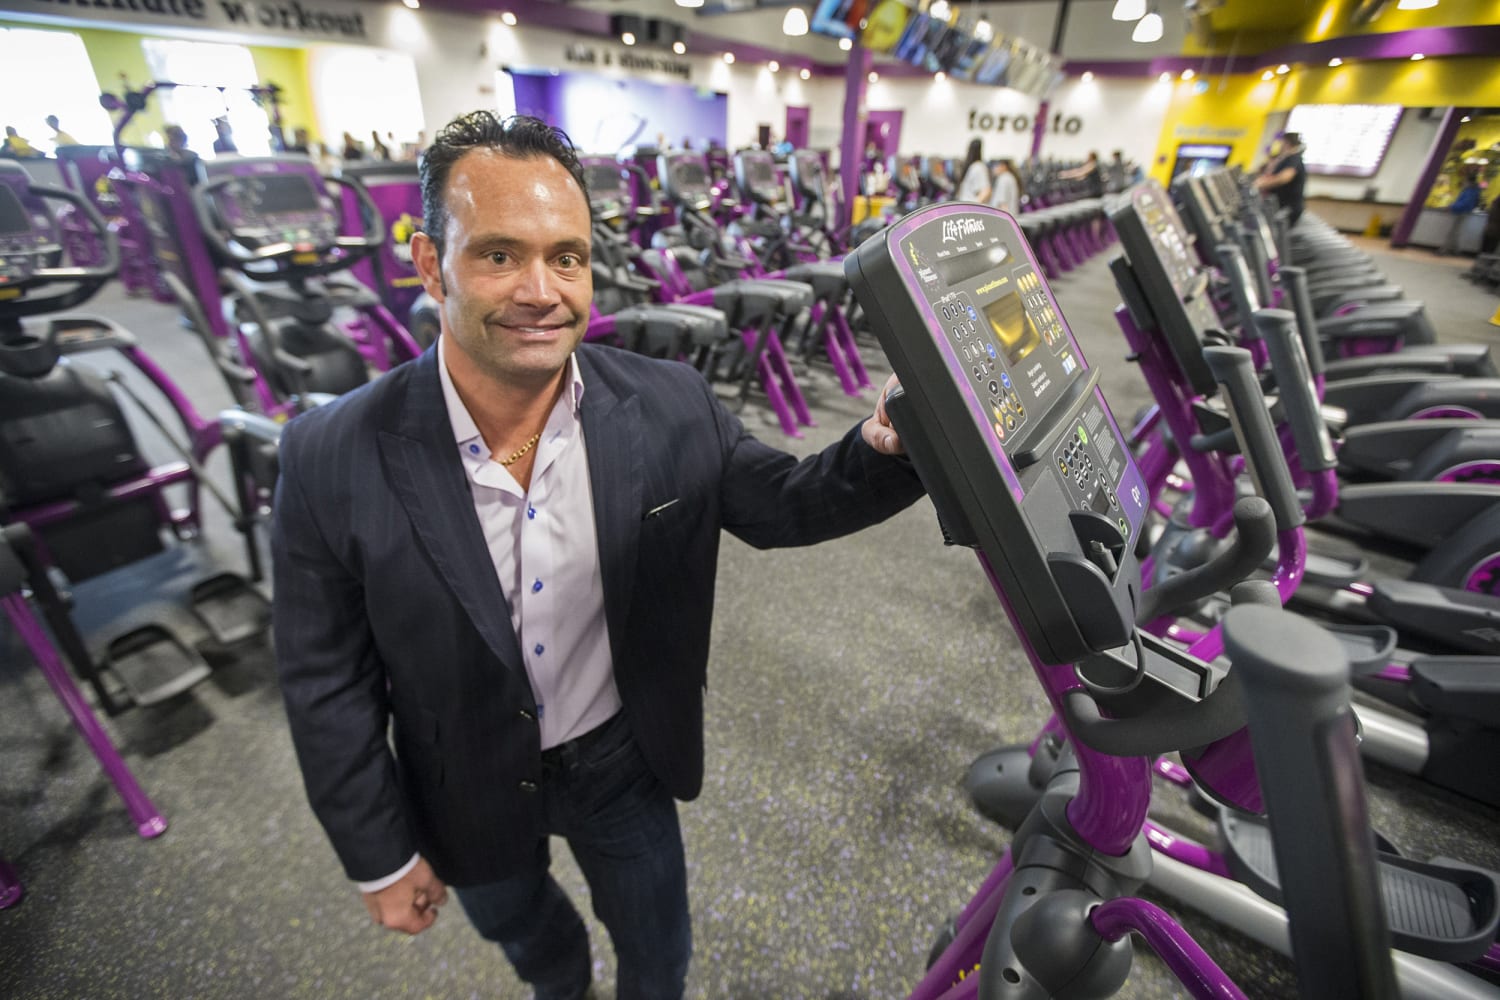 Planet Fitness shares sink after board ousts CEO Chris Rondeau in shocking move